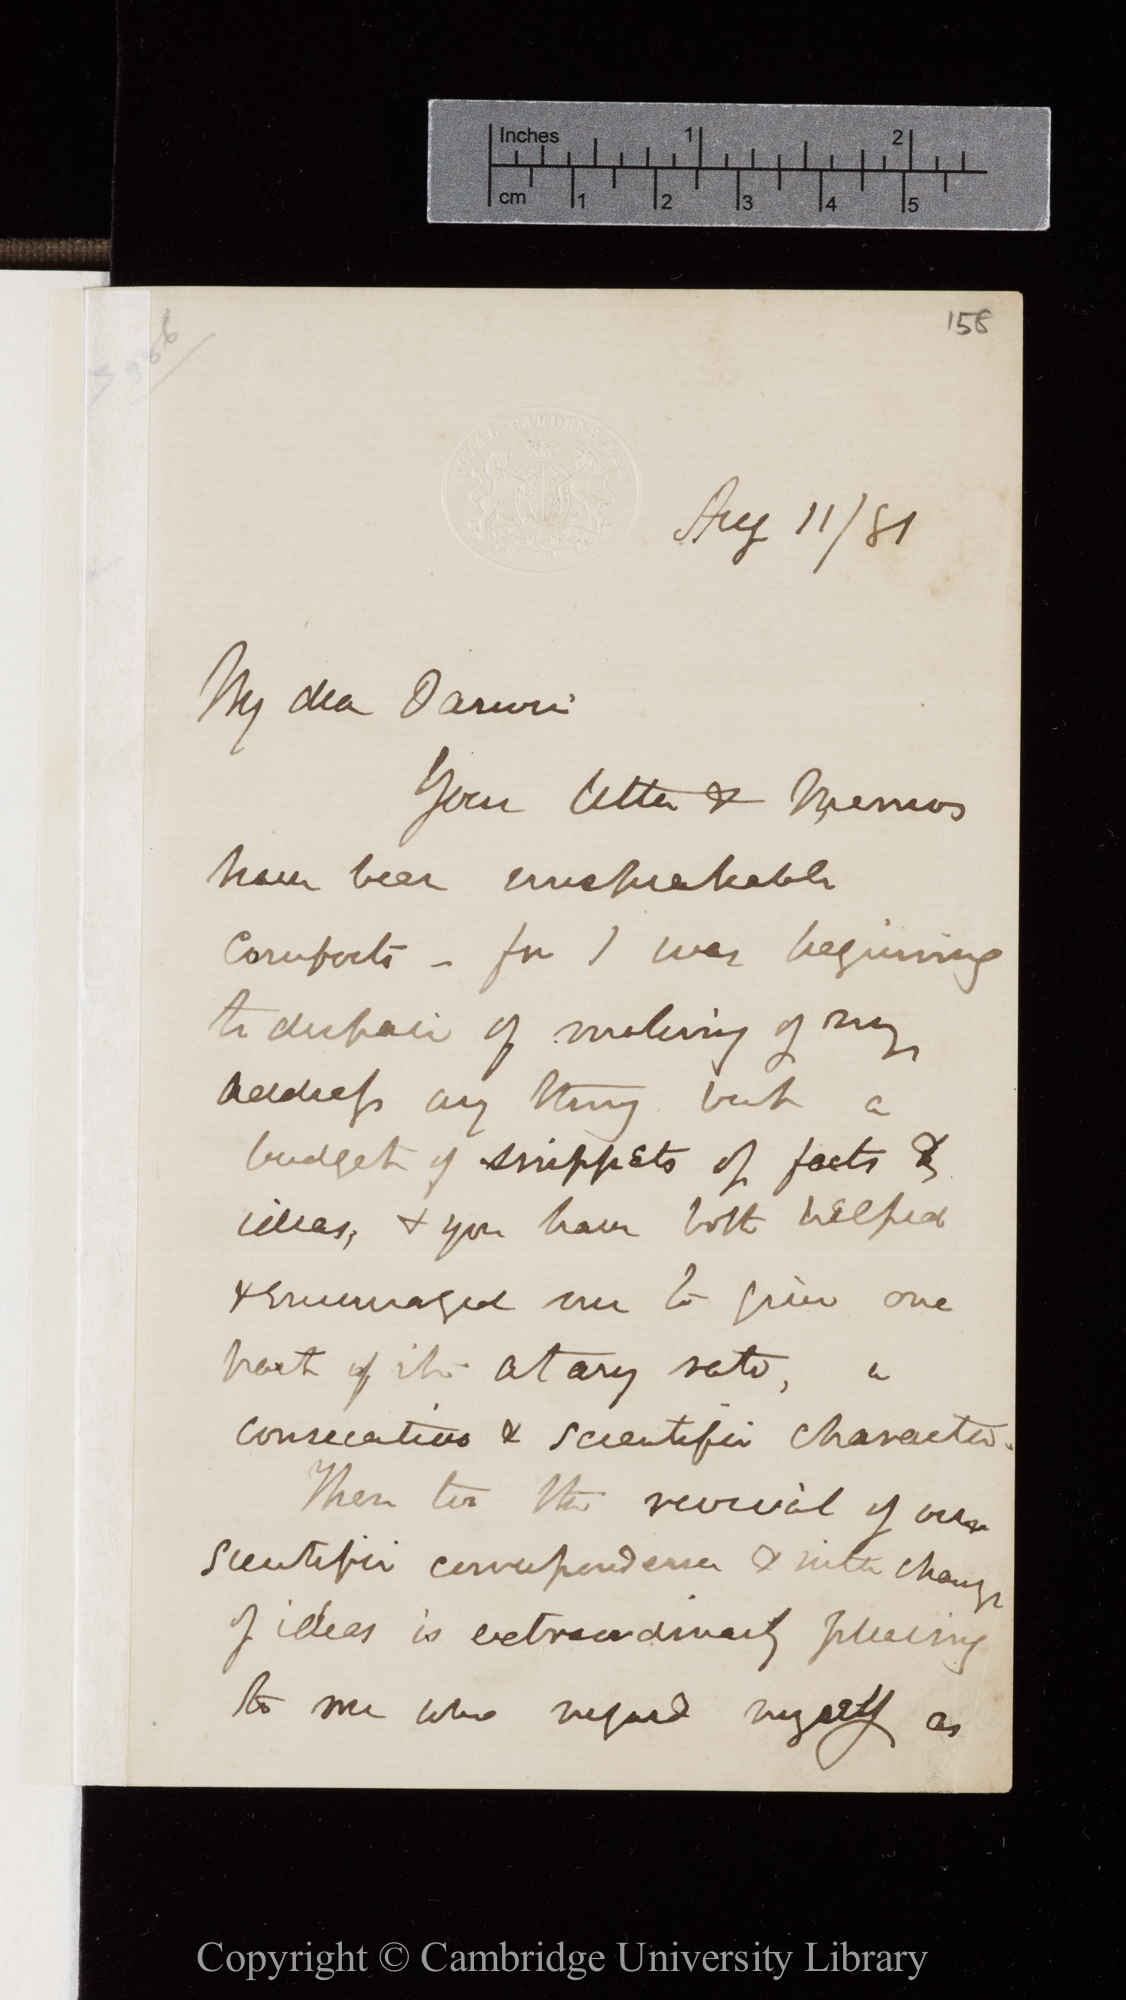 Letter from J. D. Hooker to C. R. Darwin   11 August 1881